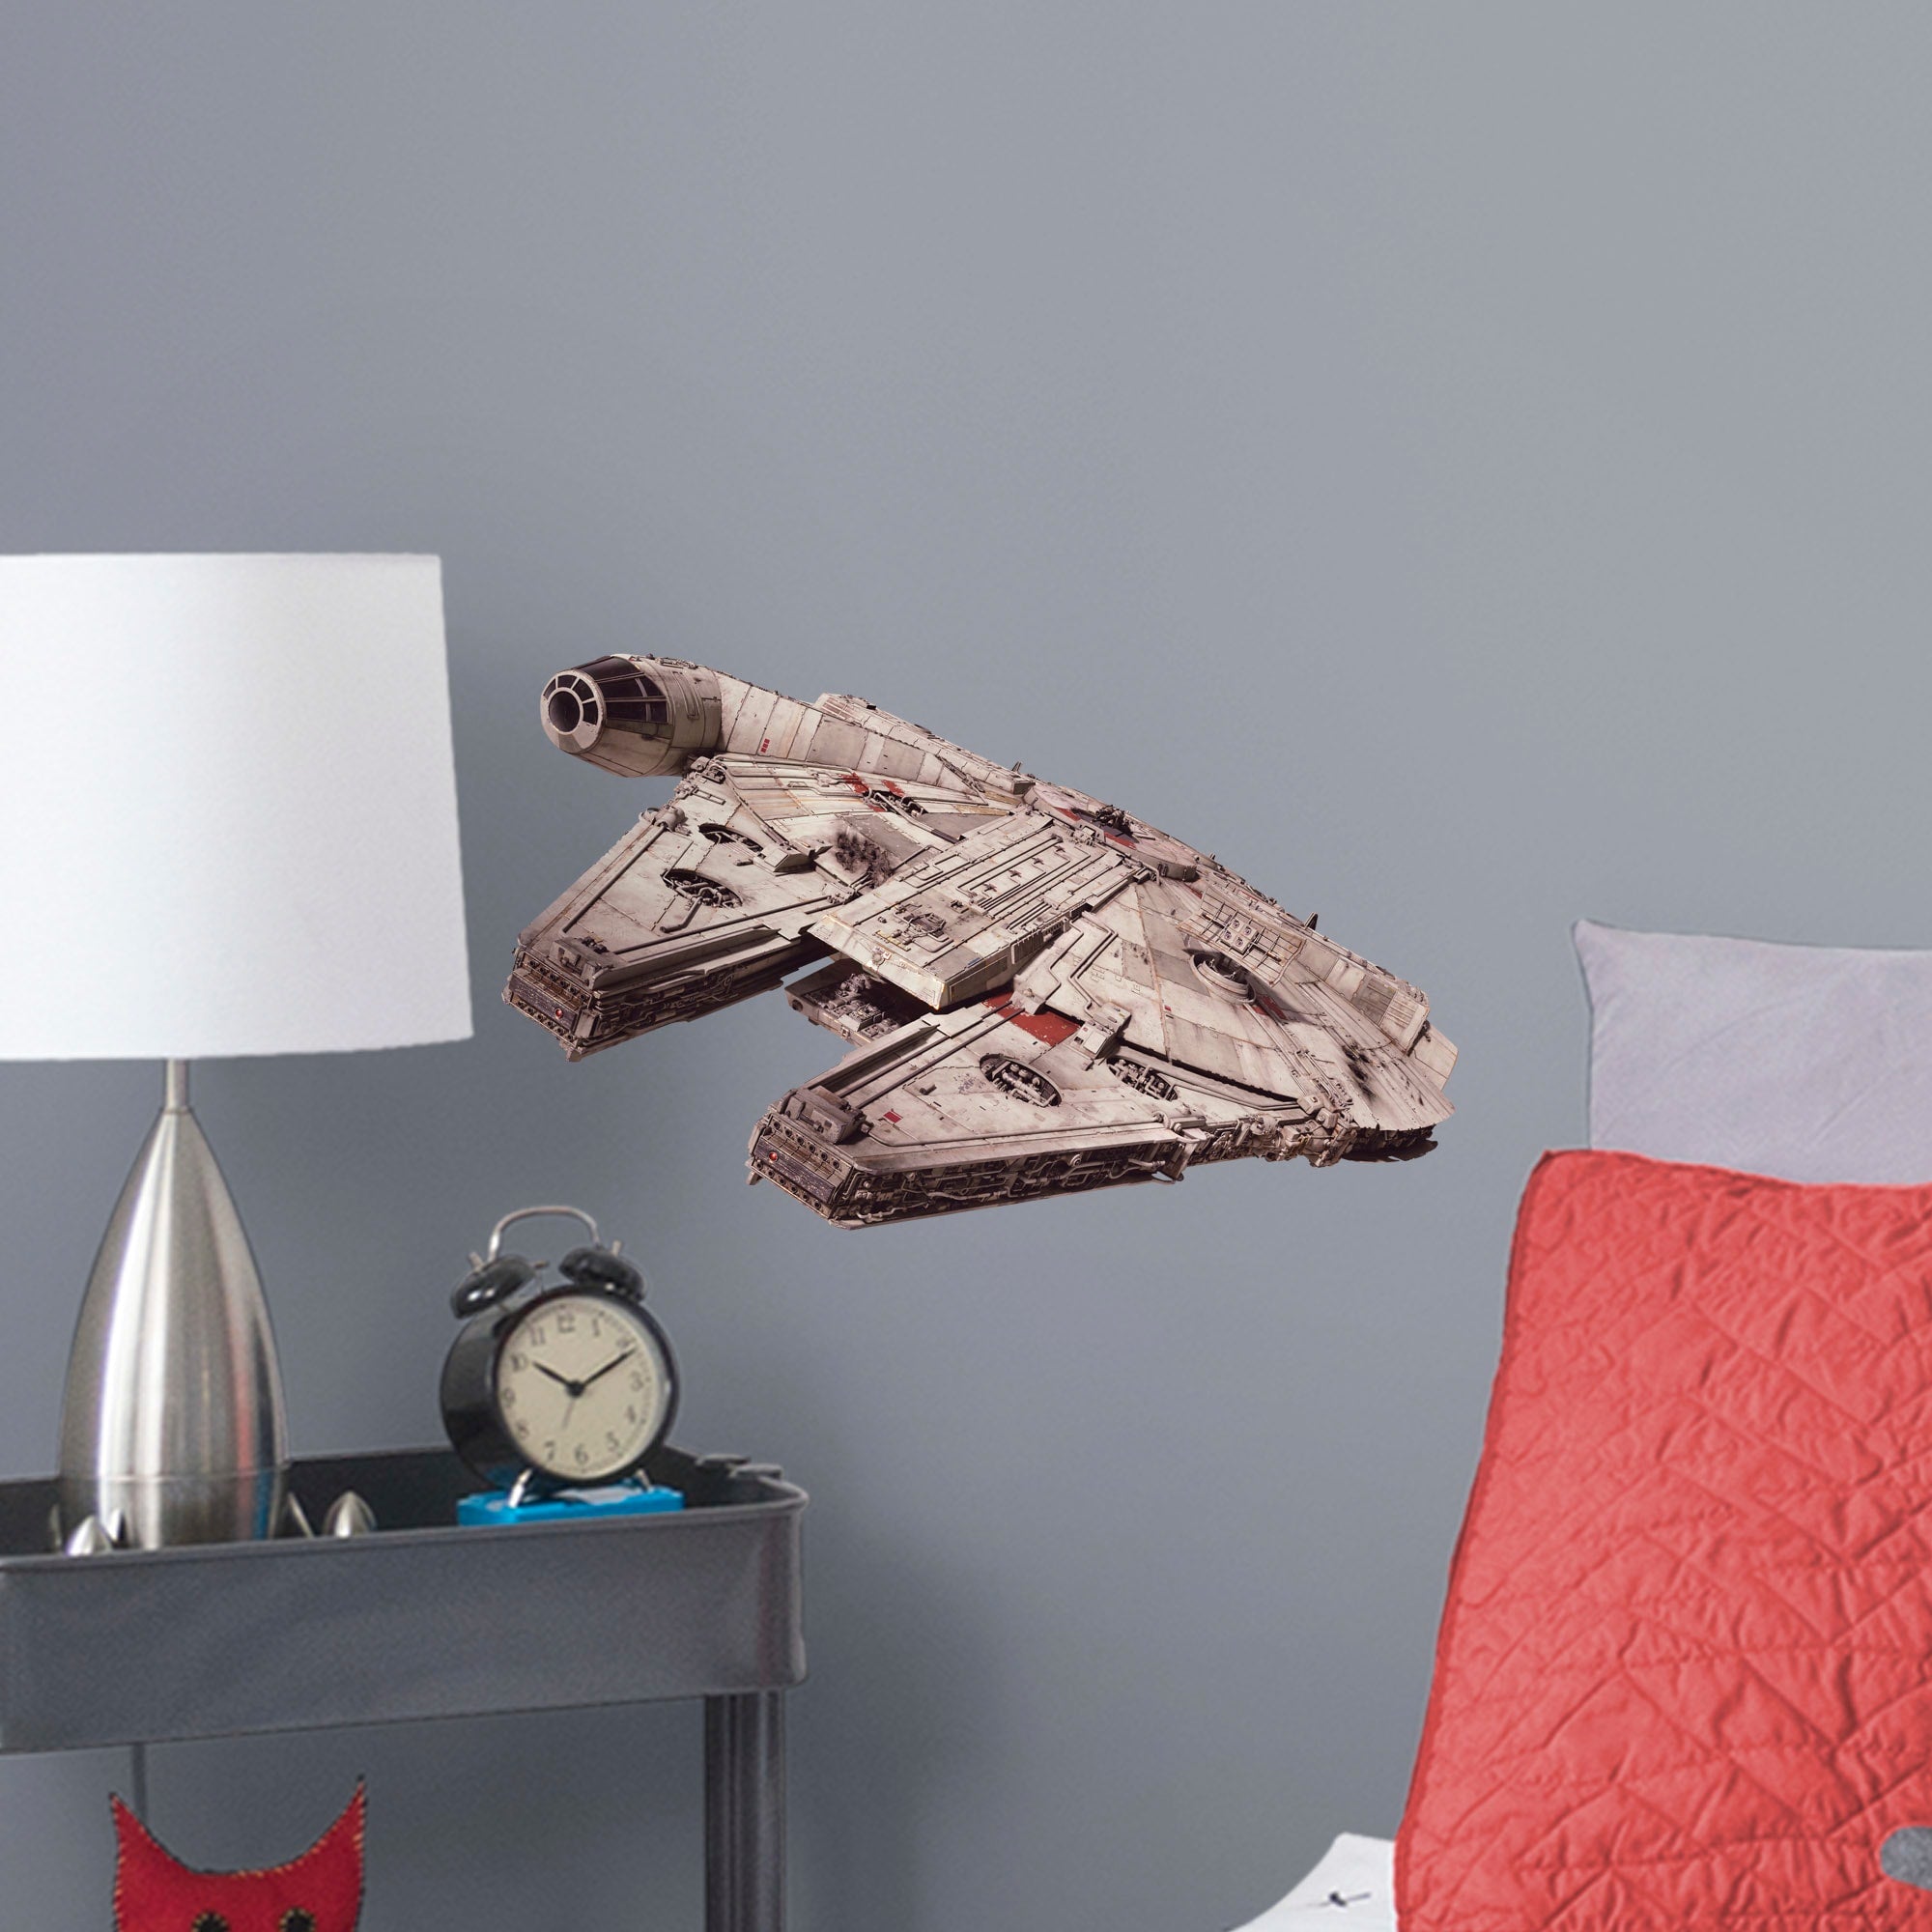 Millennium Falcon - Star Wars: The Force Awakens - Officially Licensed Removable Wall Decal Large by Fathead | Vinyl